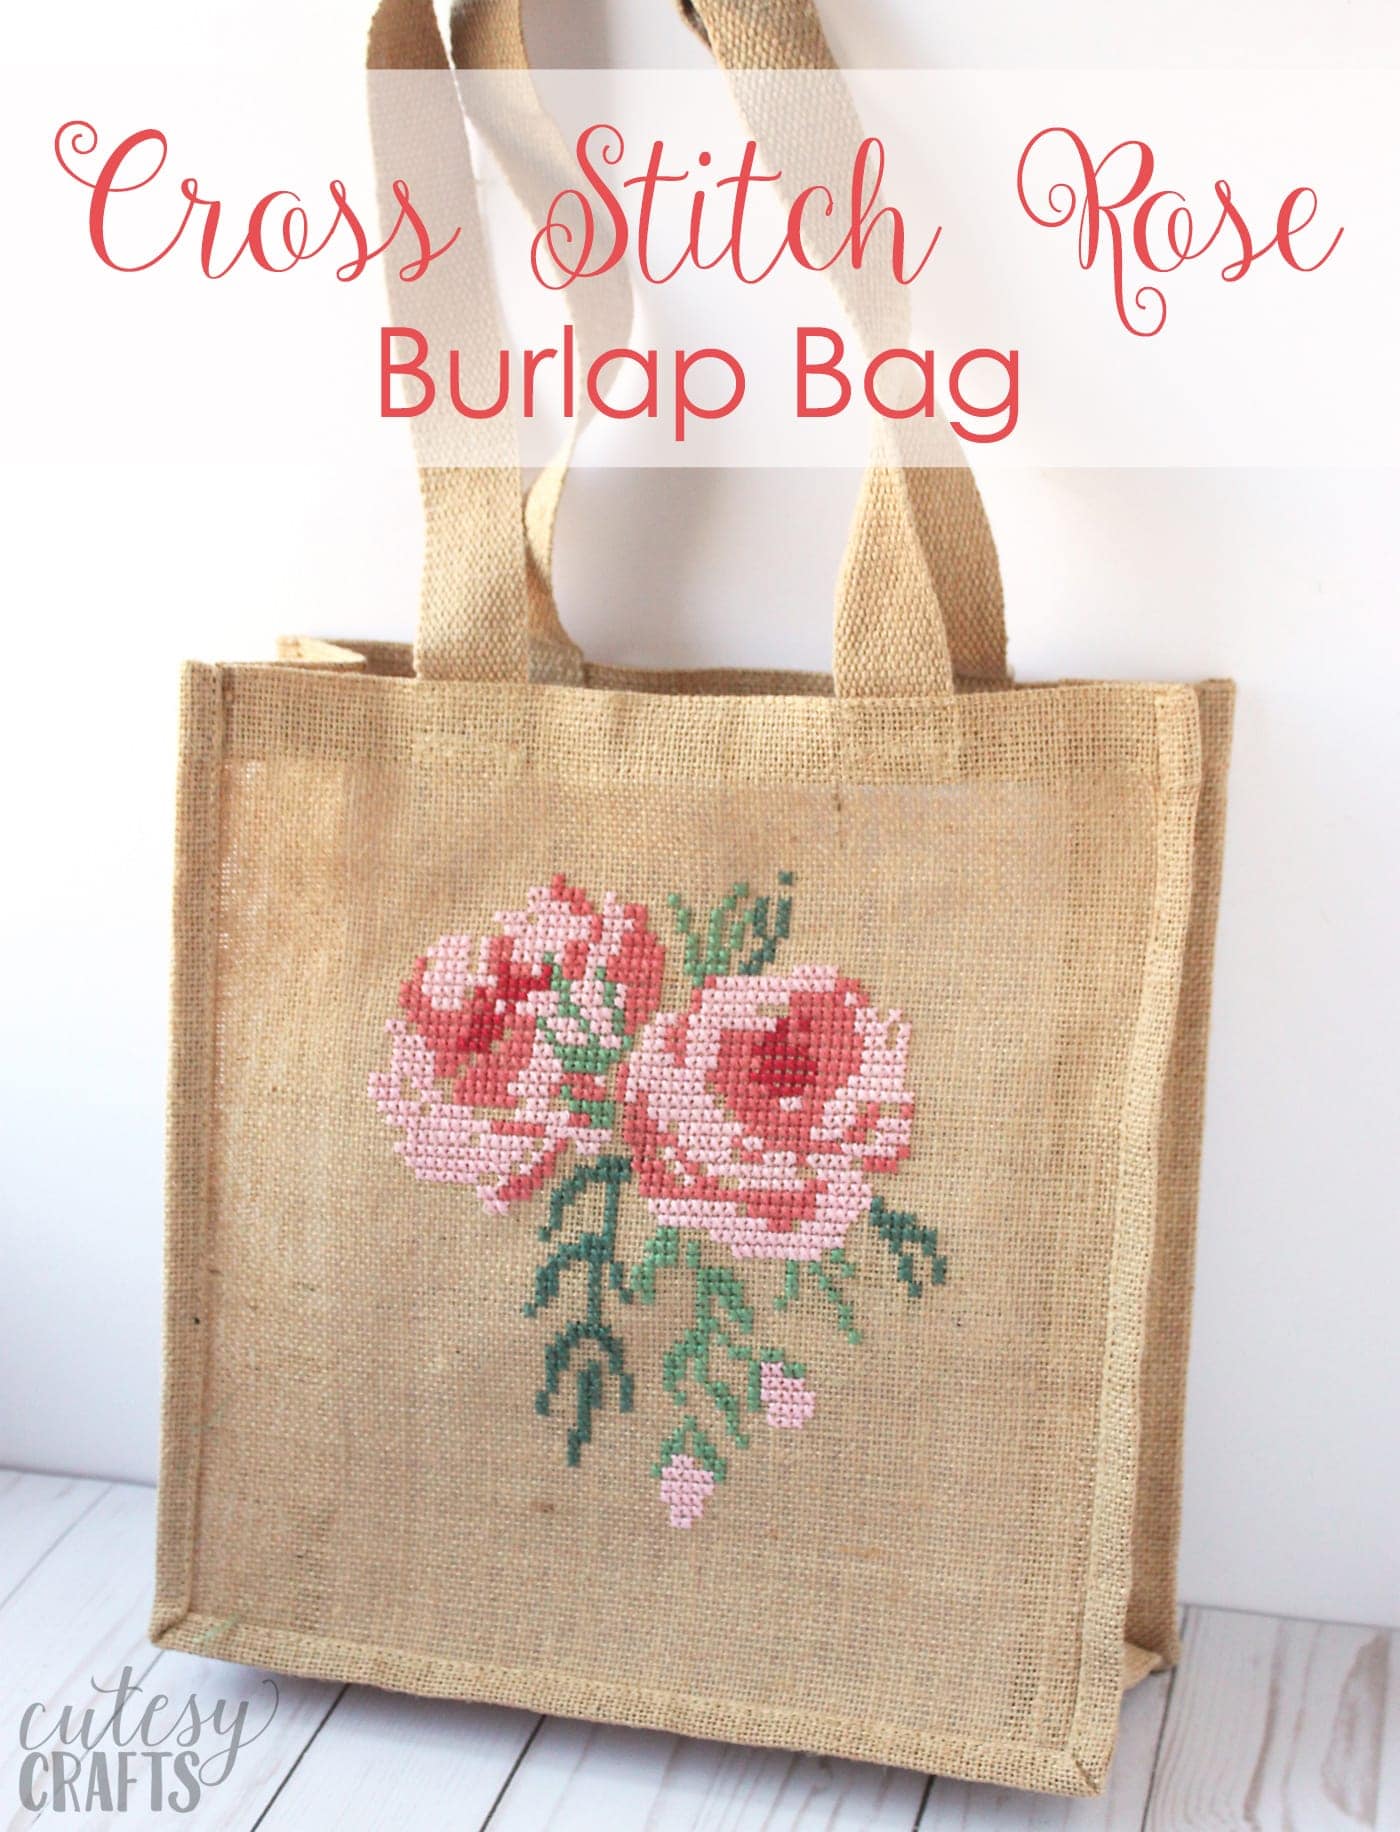 How to cross stitch on clothes and tote bags - Gathered